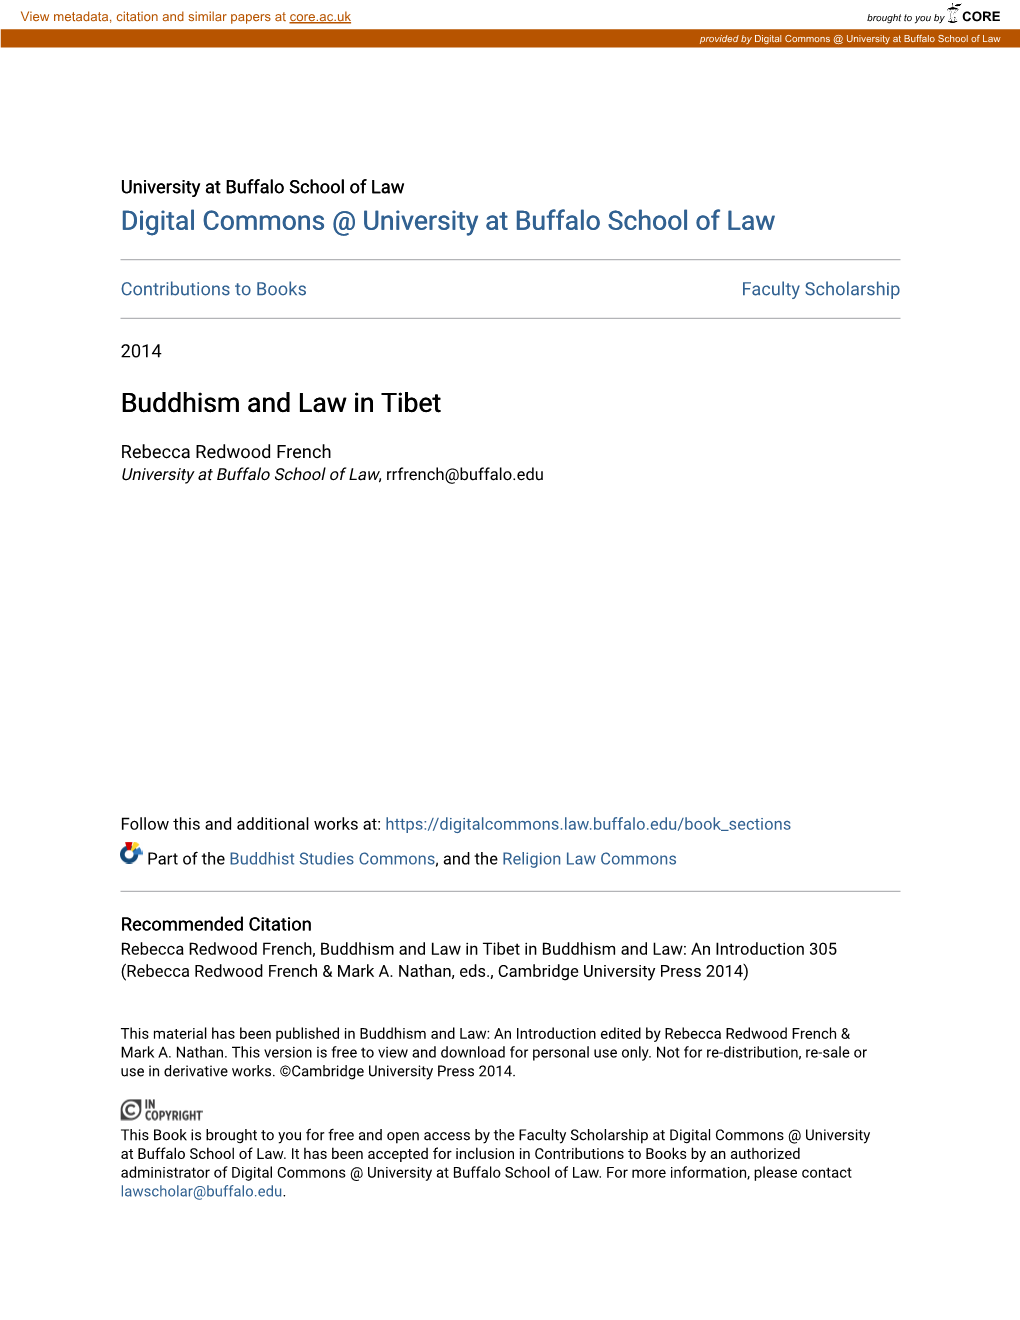 Buddhism and Law in Tibet